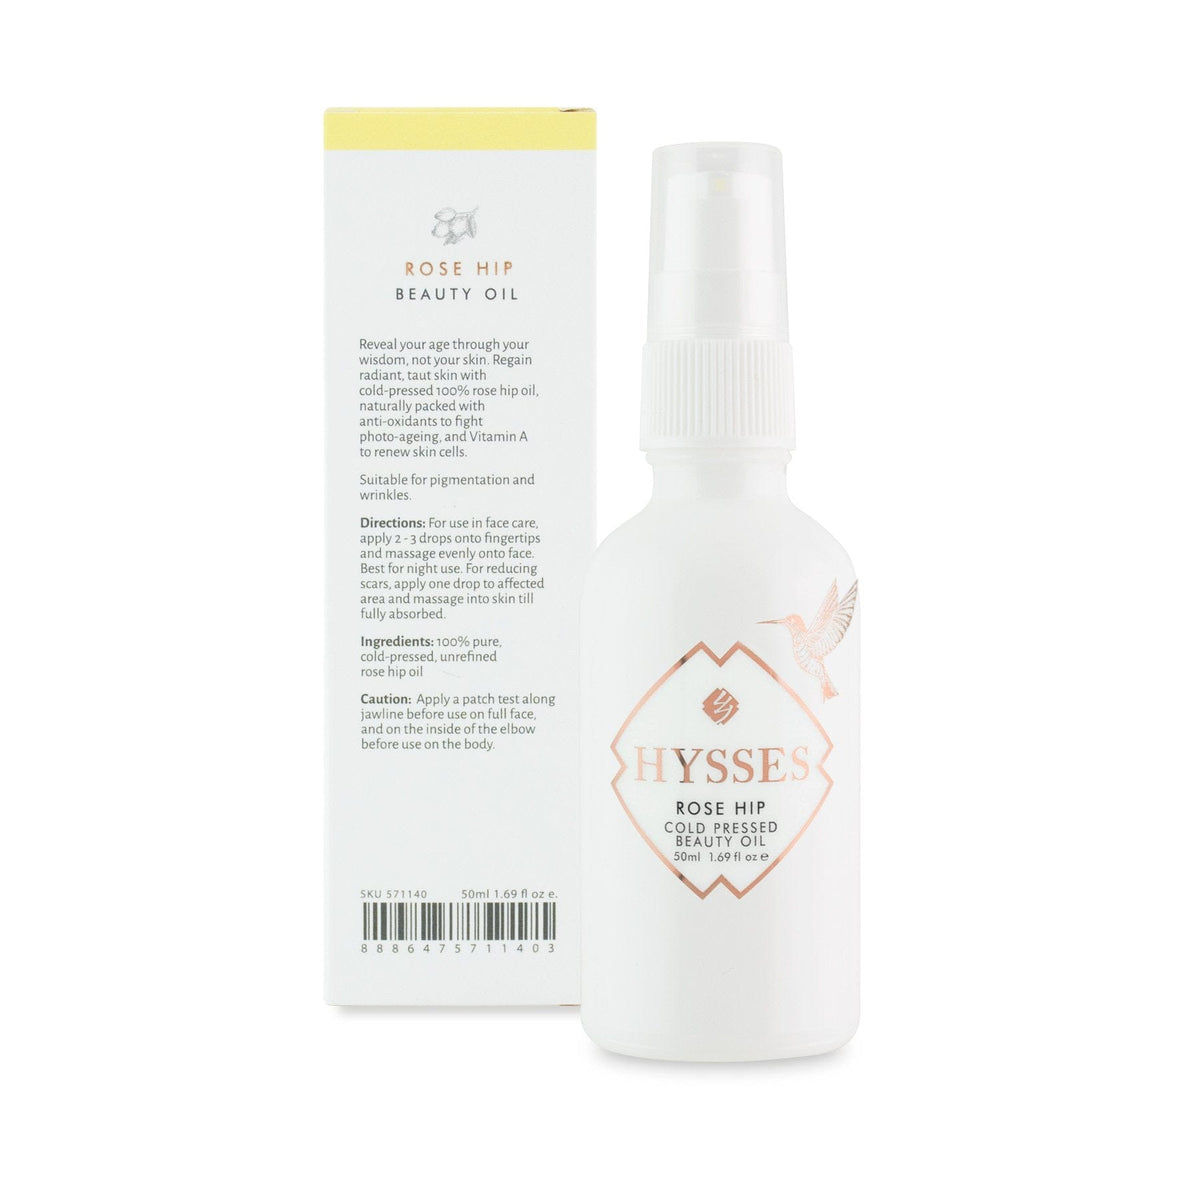 Cold Pressed Beauty Oil Rose Hip - Hysses Singapore